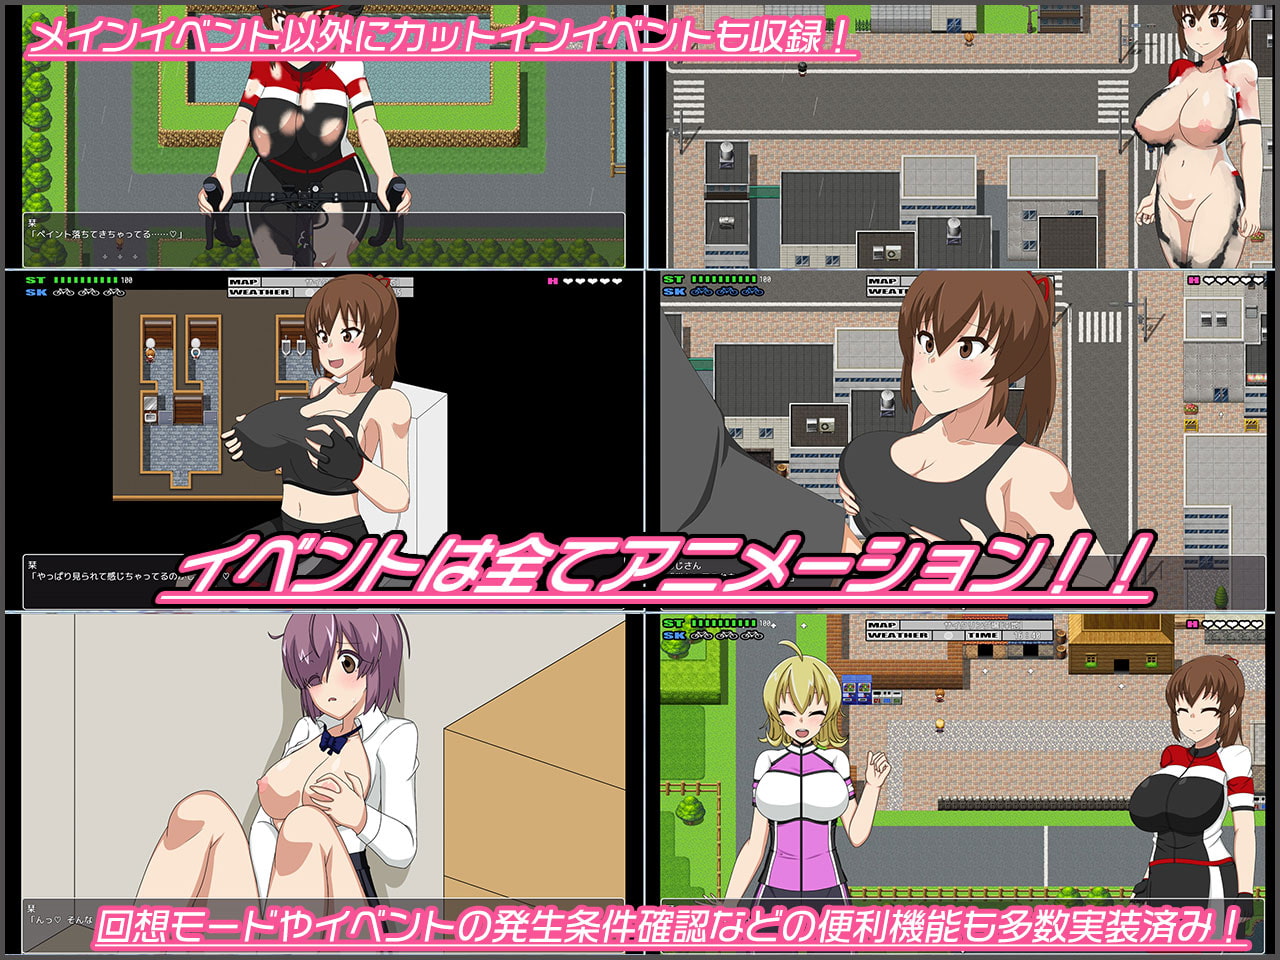 FlashCyclingRide.2 [Free Ride Exhibitionist RPG] [H.H.WORKS.]